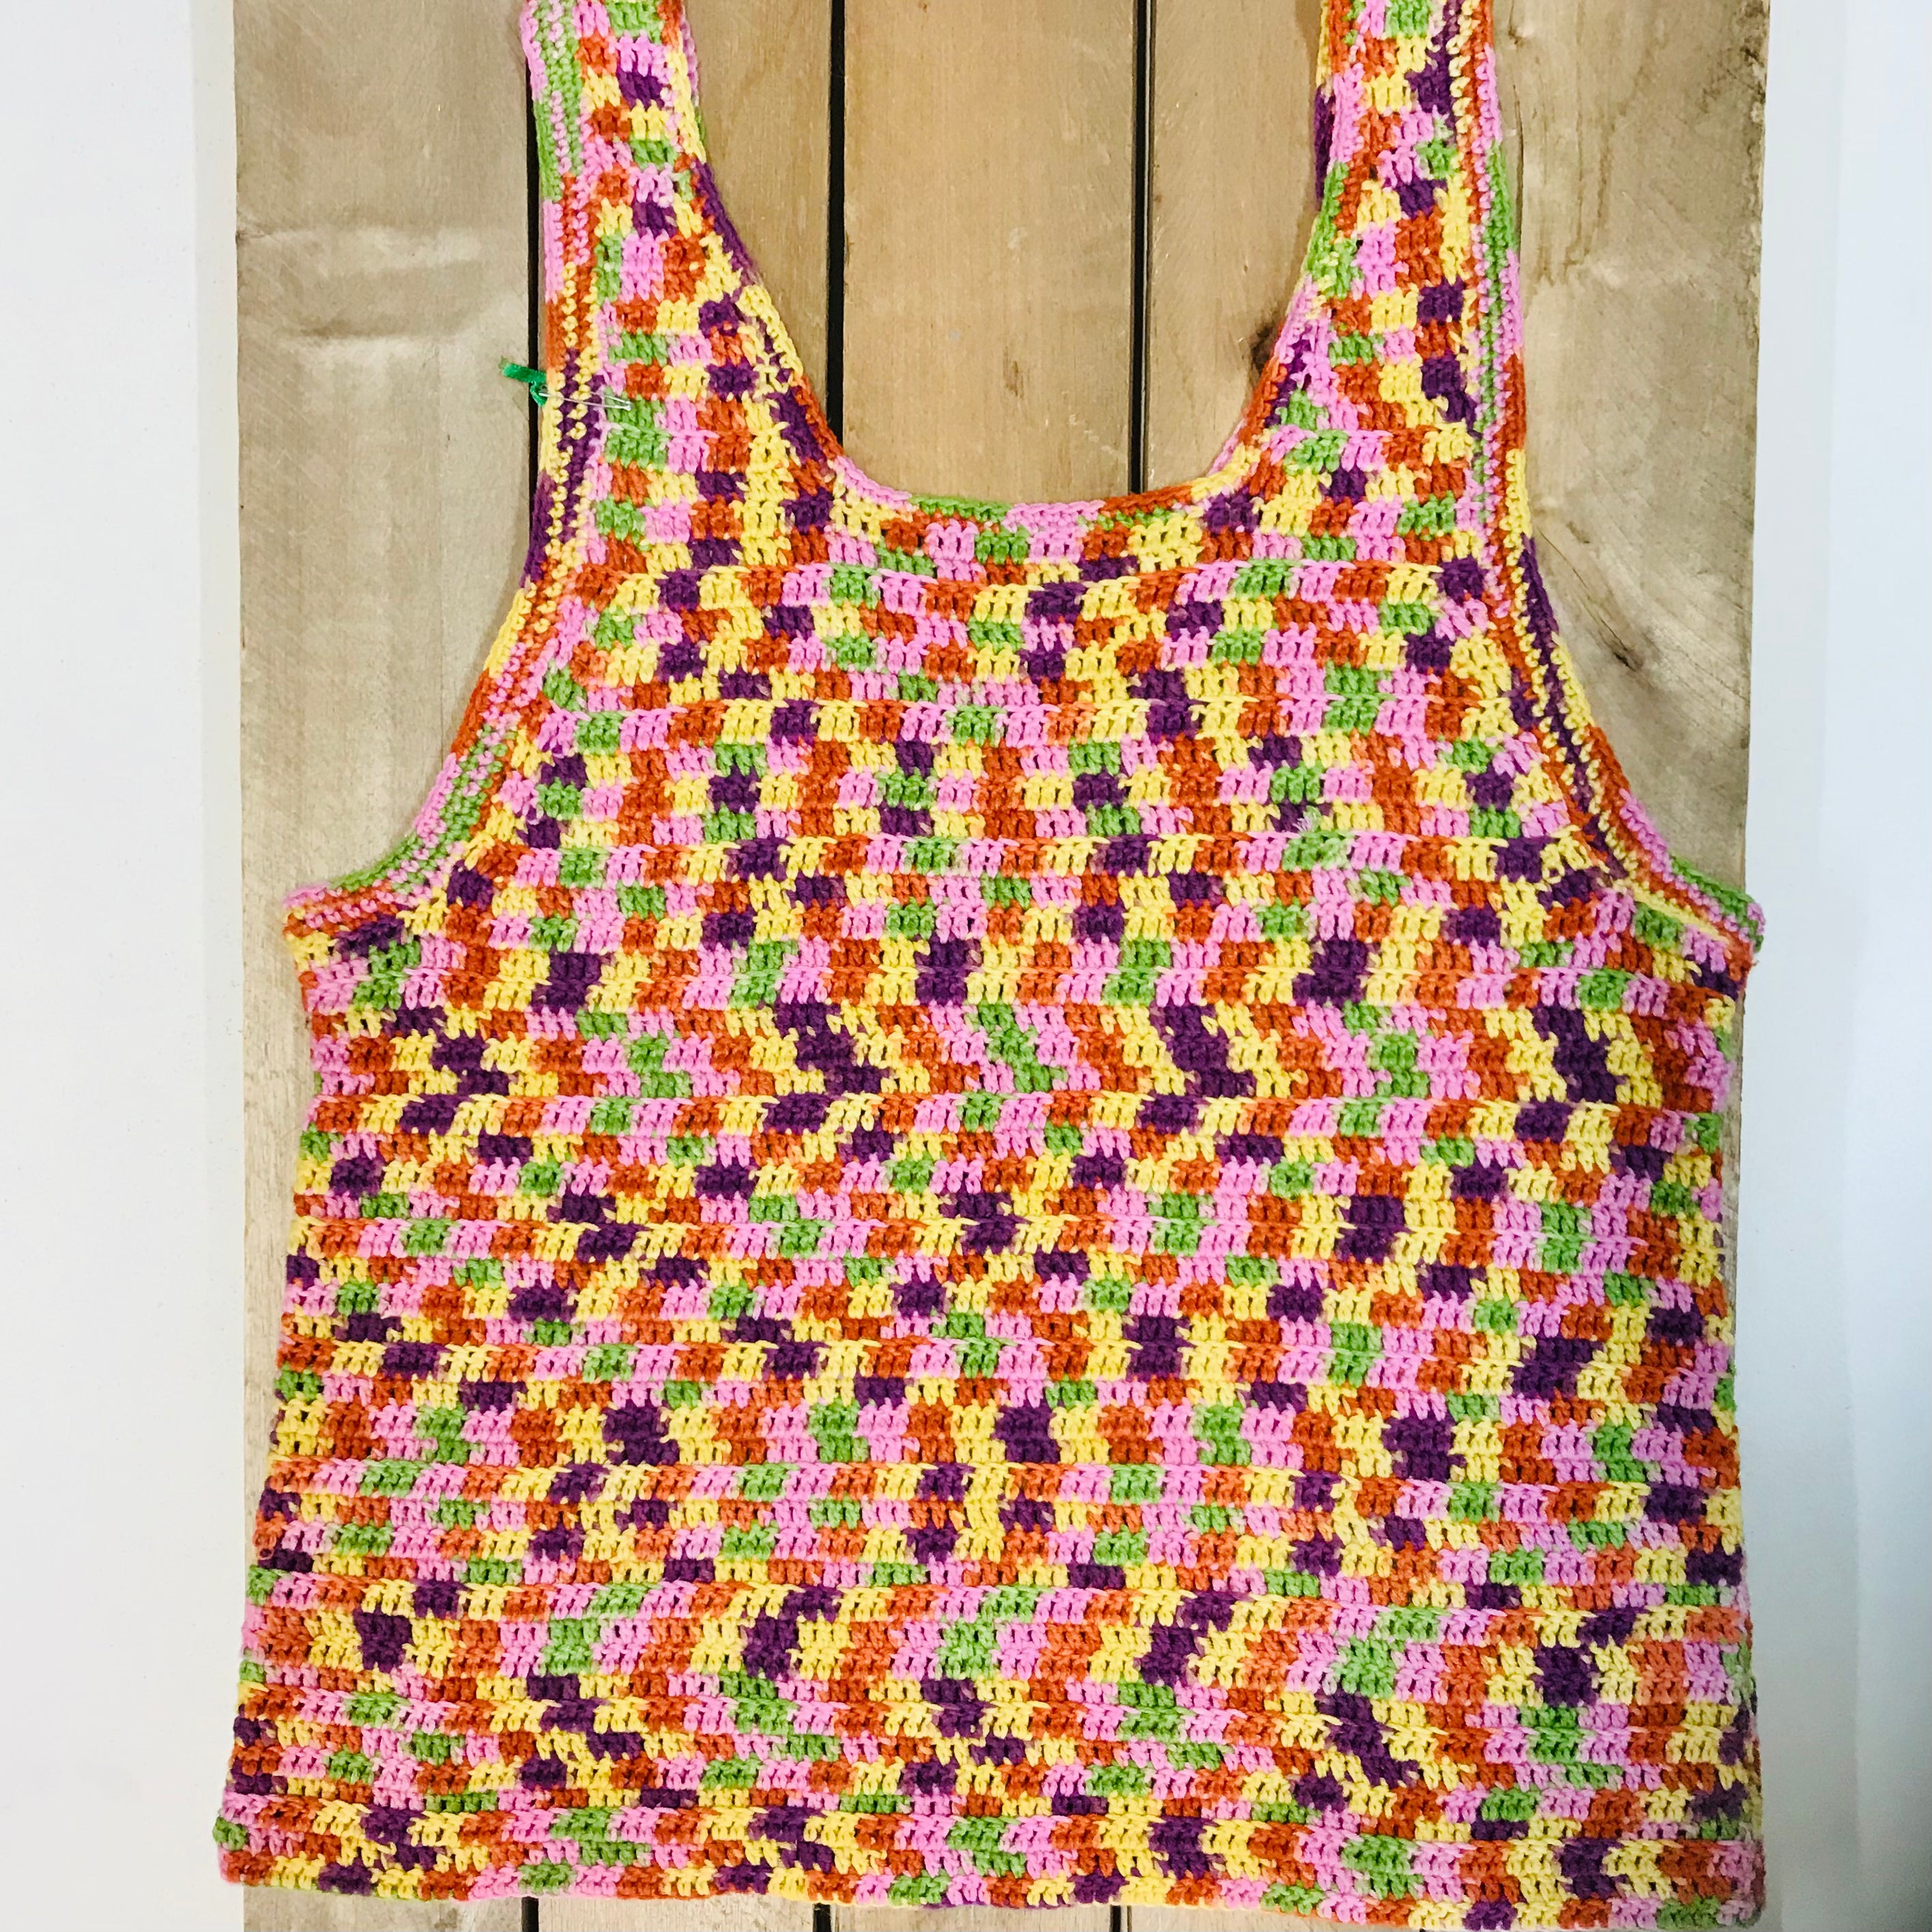 Crocheted locally - Singlet vest top **ON SALE**